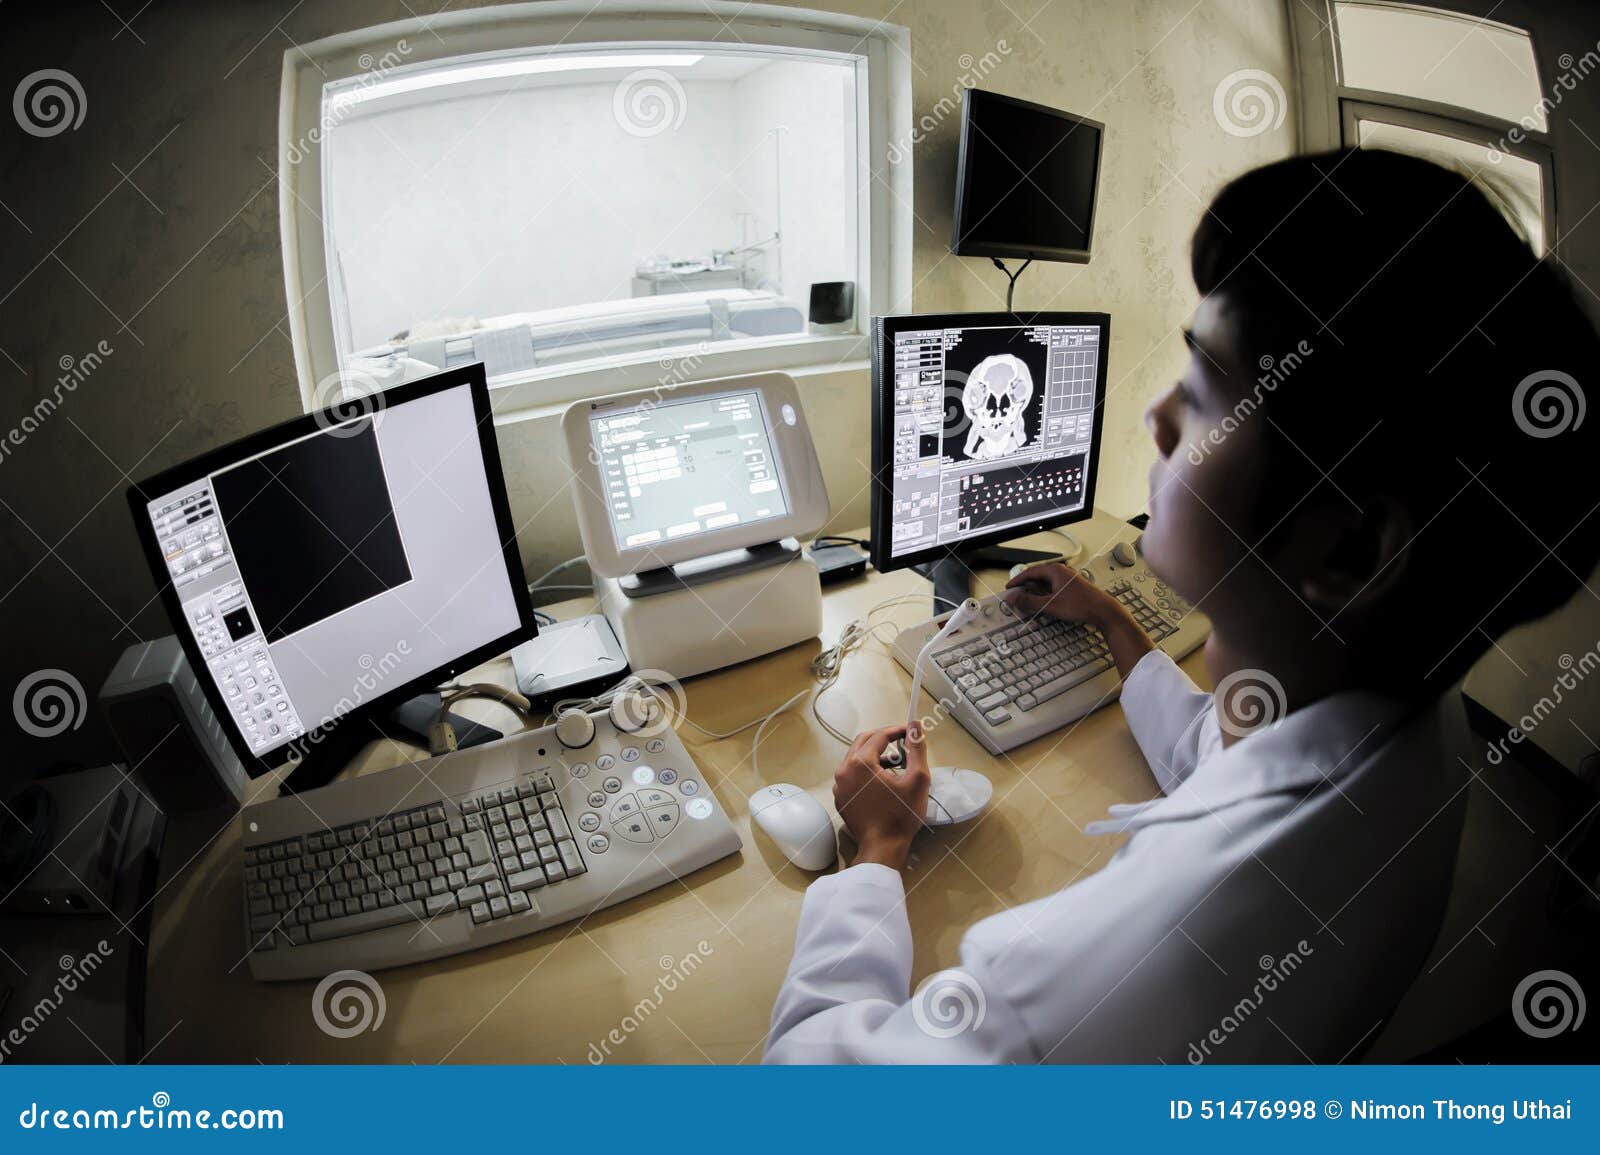 veterinarian doctor with mri computer control